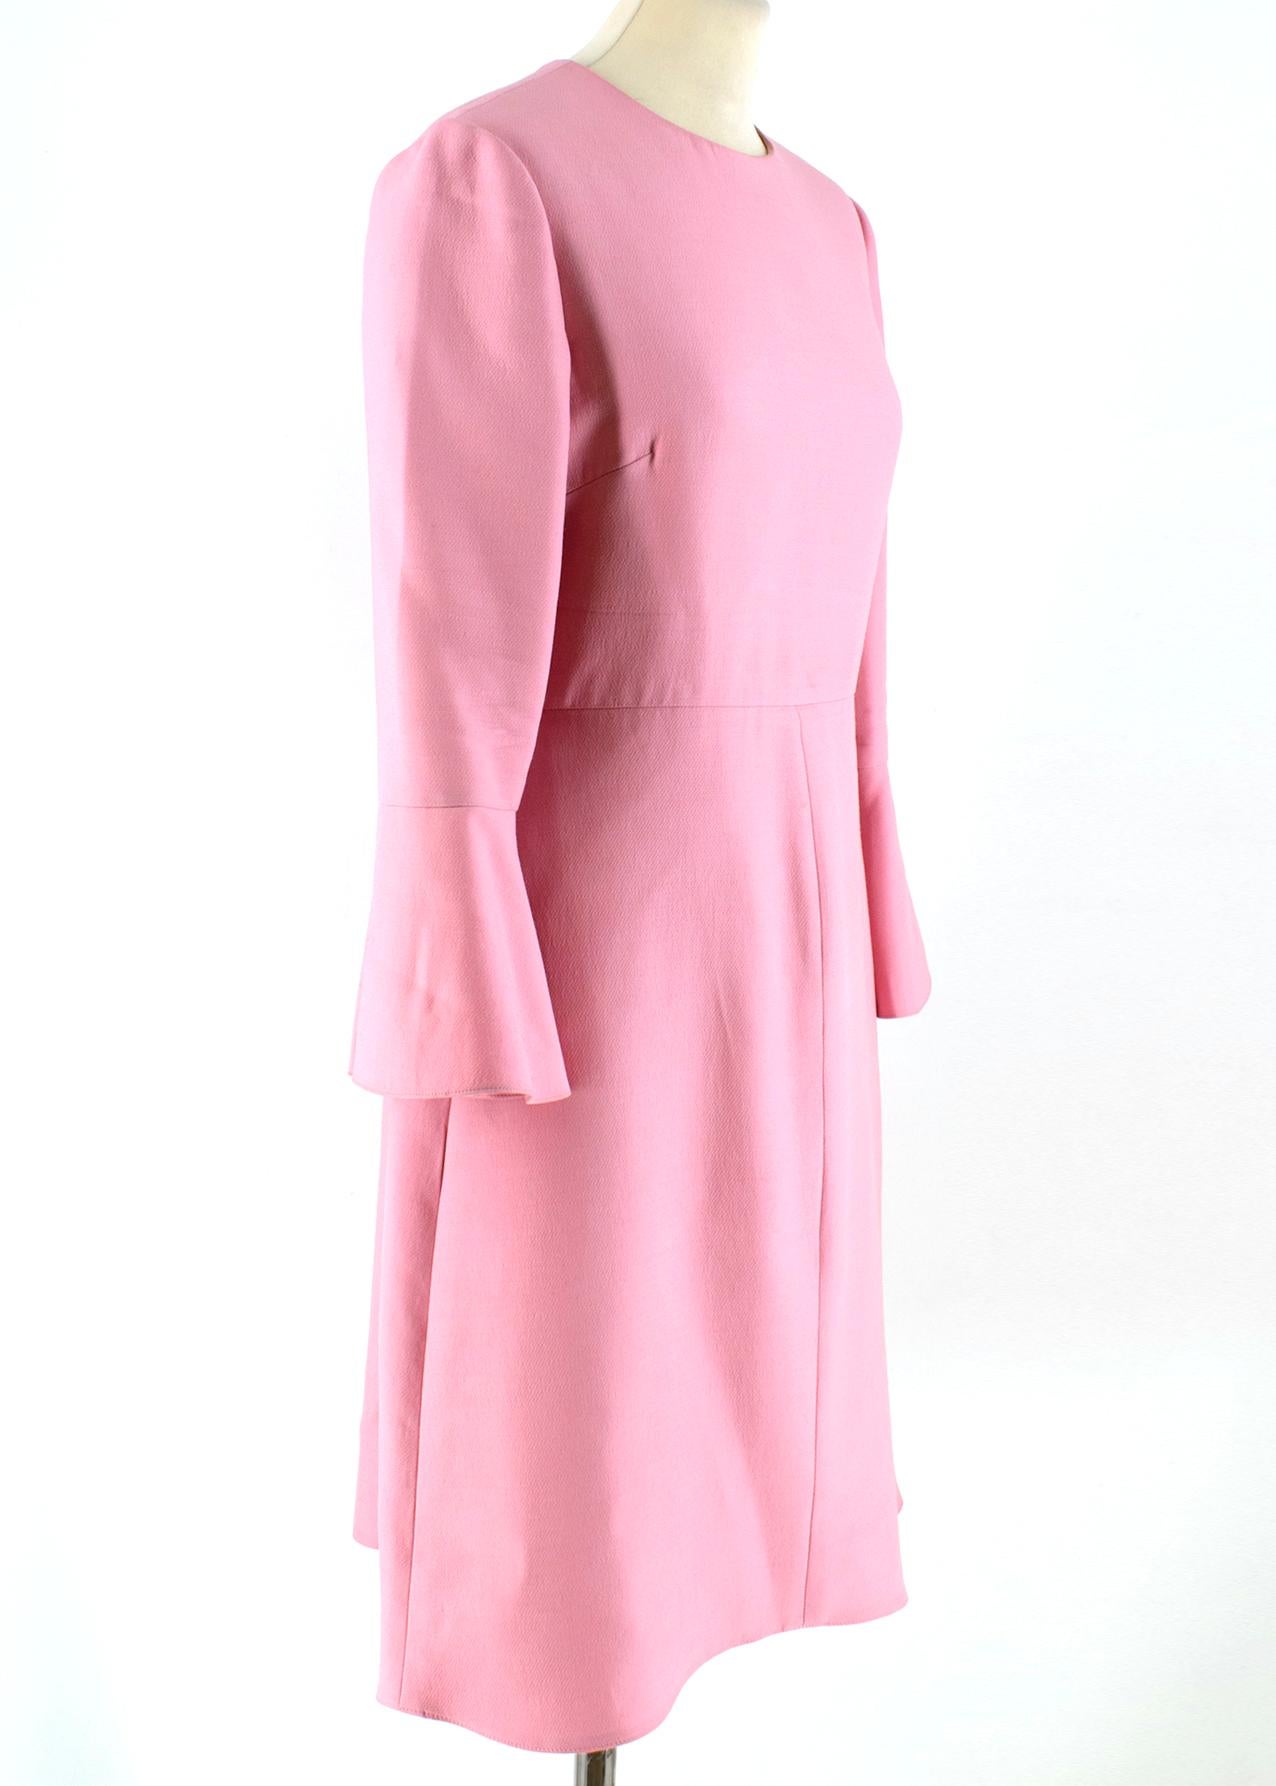 Valentino Pink Ruffle Sleeve Dress 

- Pink Midi Dress
- Round neck, mid-sleeved 
- Flared ruffle sleeves 
- Seams at waist and skirt 
- Zip fastening closure at back 
- Silk lining
- 65% Wool, 35% Silk 

Please note, these items are pre-owned and